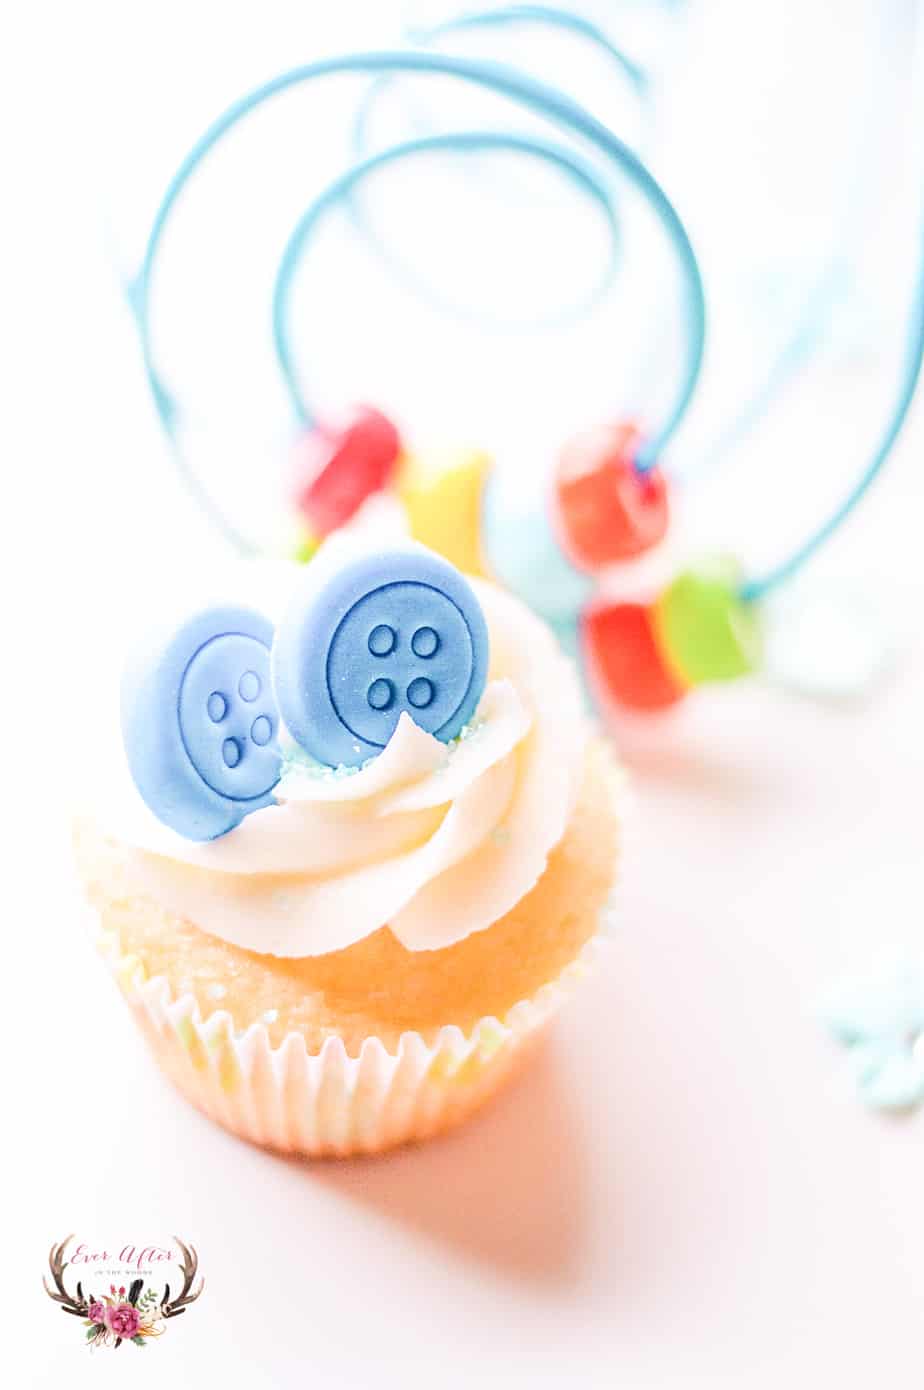 These button cupcakes are the perfect dessert for a gender neutral baby shower. Simply make your cute buttons from the color of your shower theme.